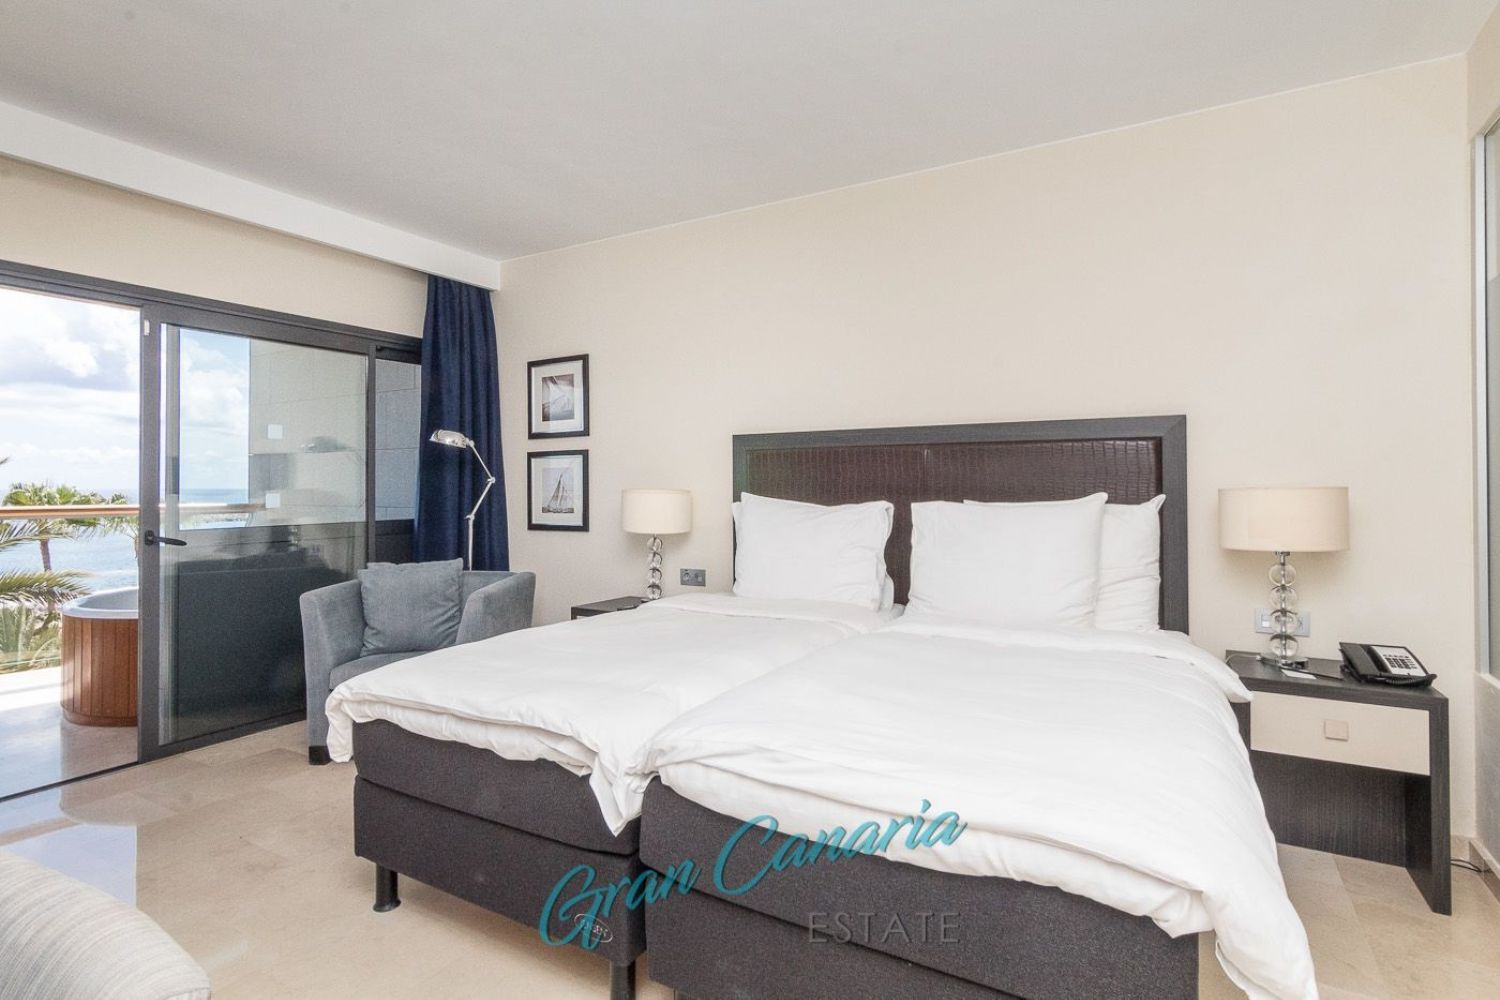 Flat for sale in first sea line in Aguasmarinas, Mogán